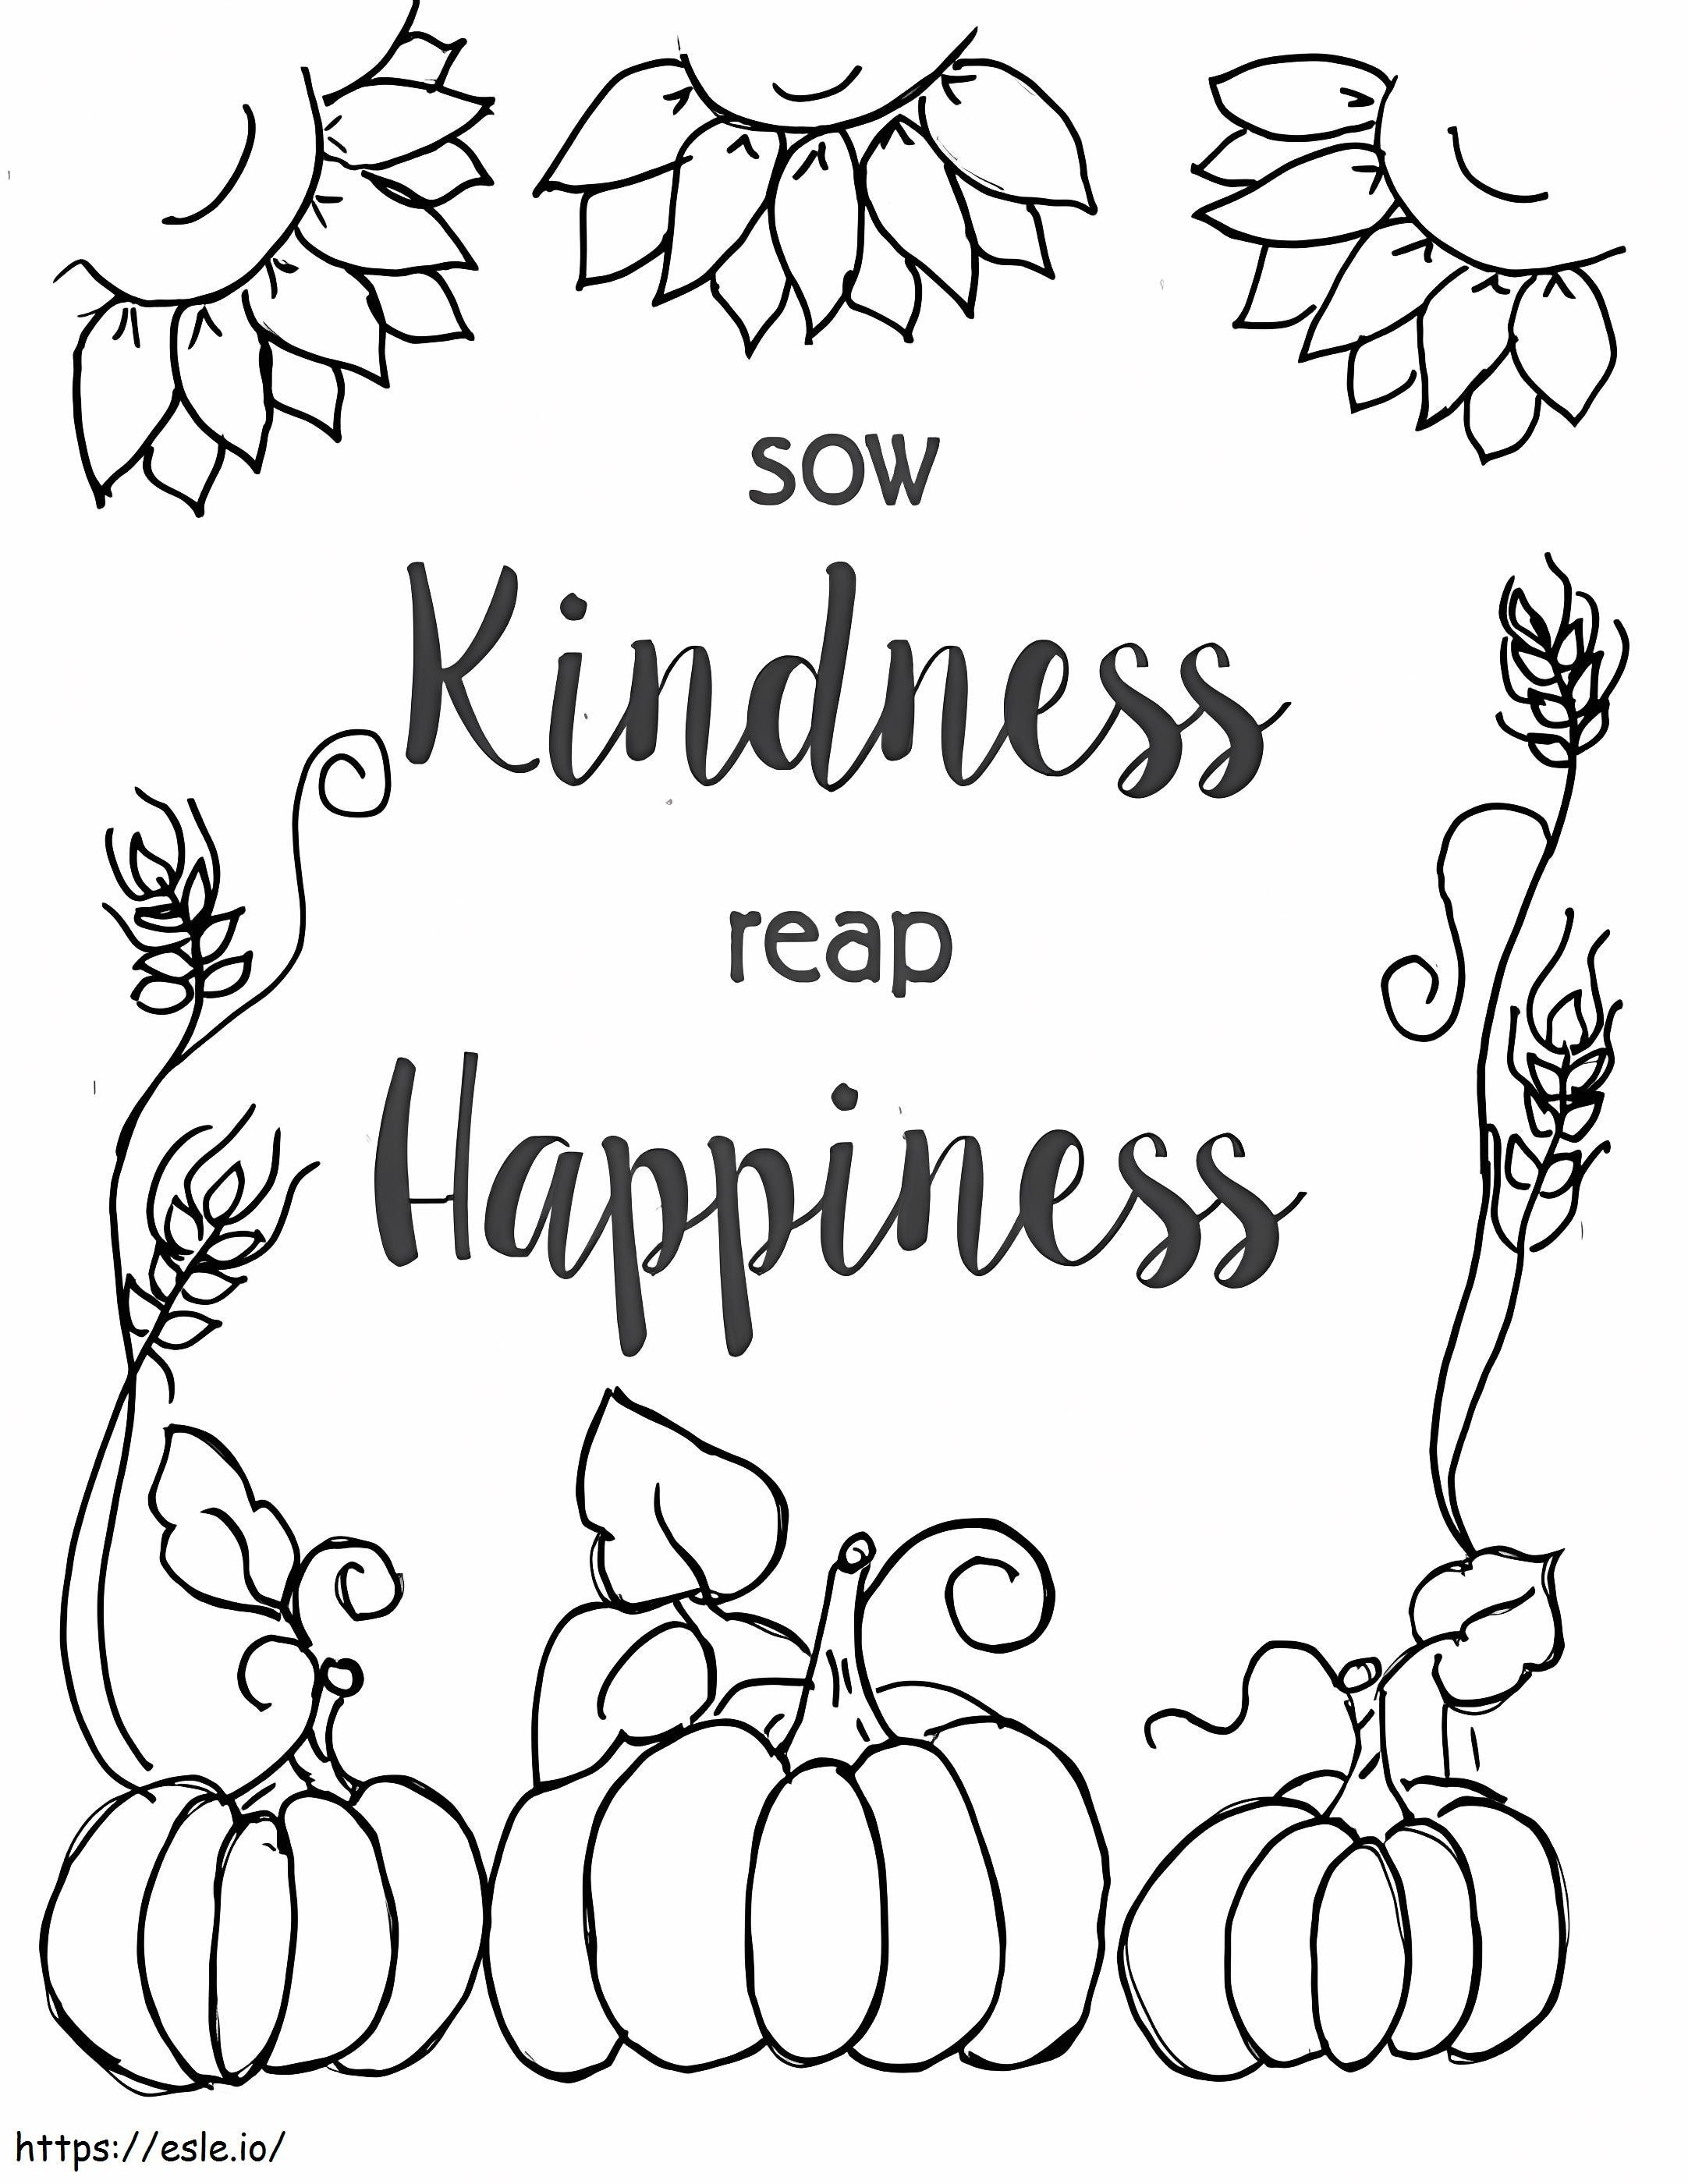 Sow Kindness Reap Happiness coloring page